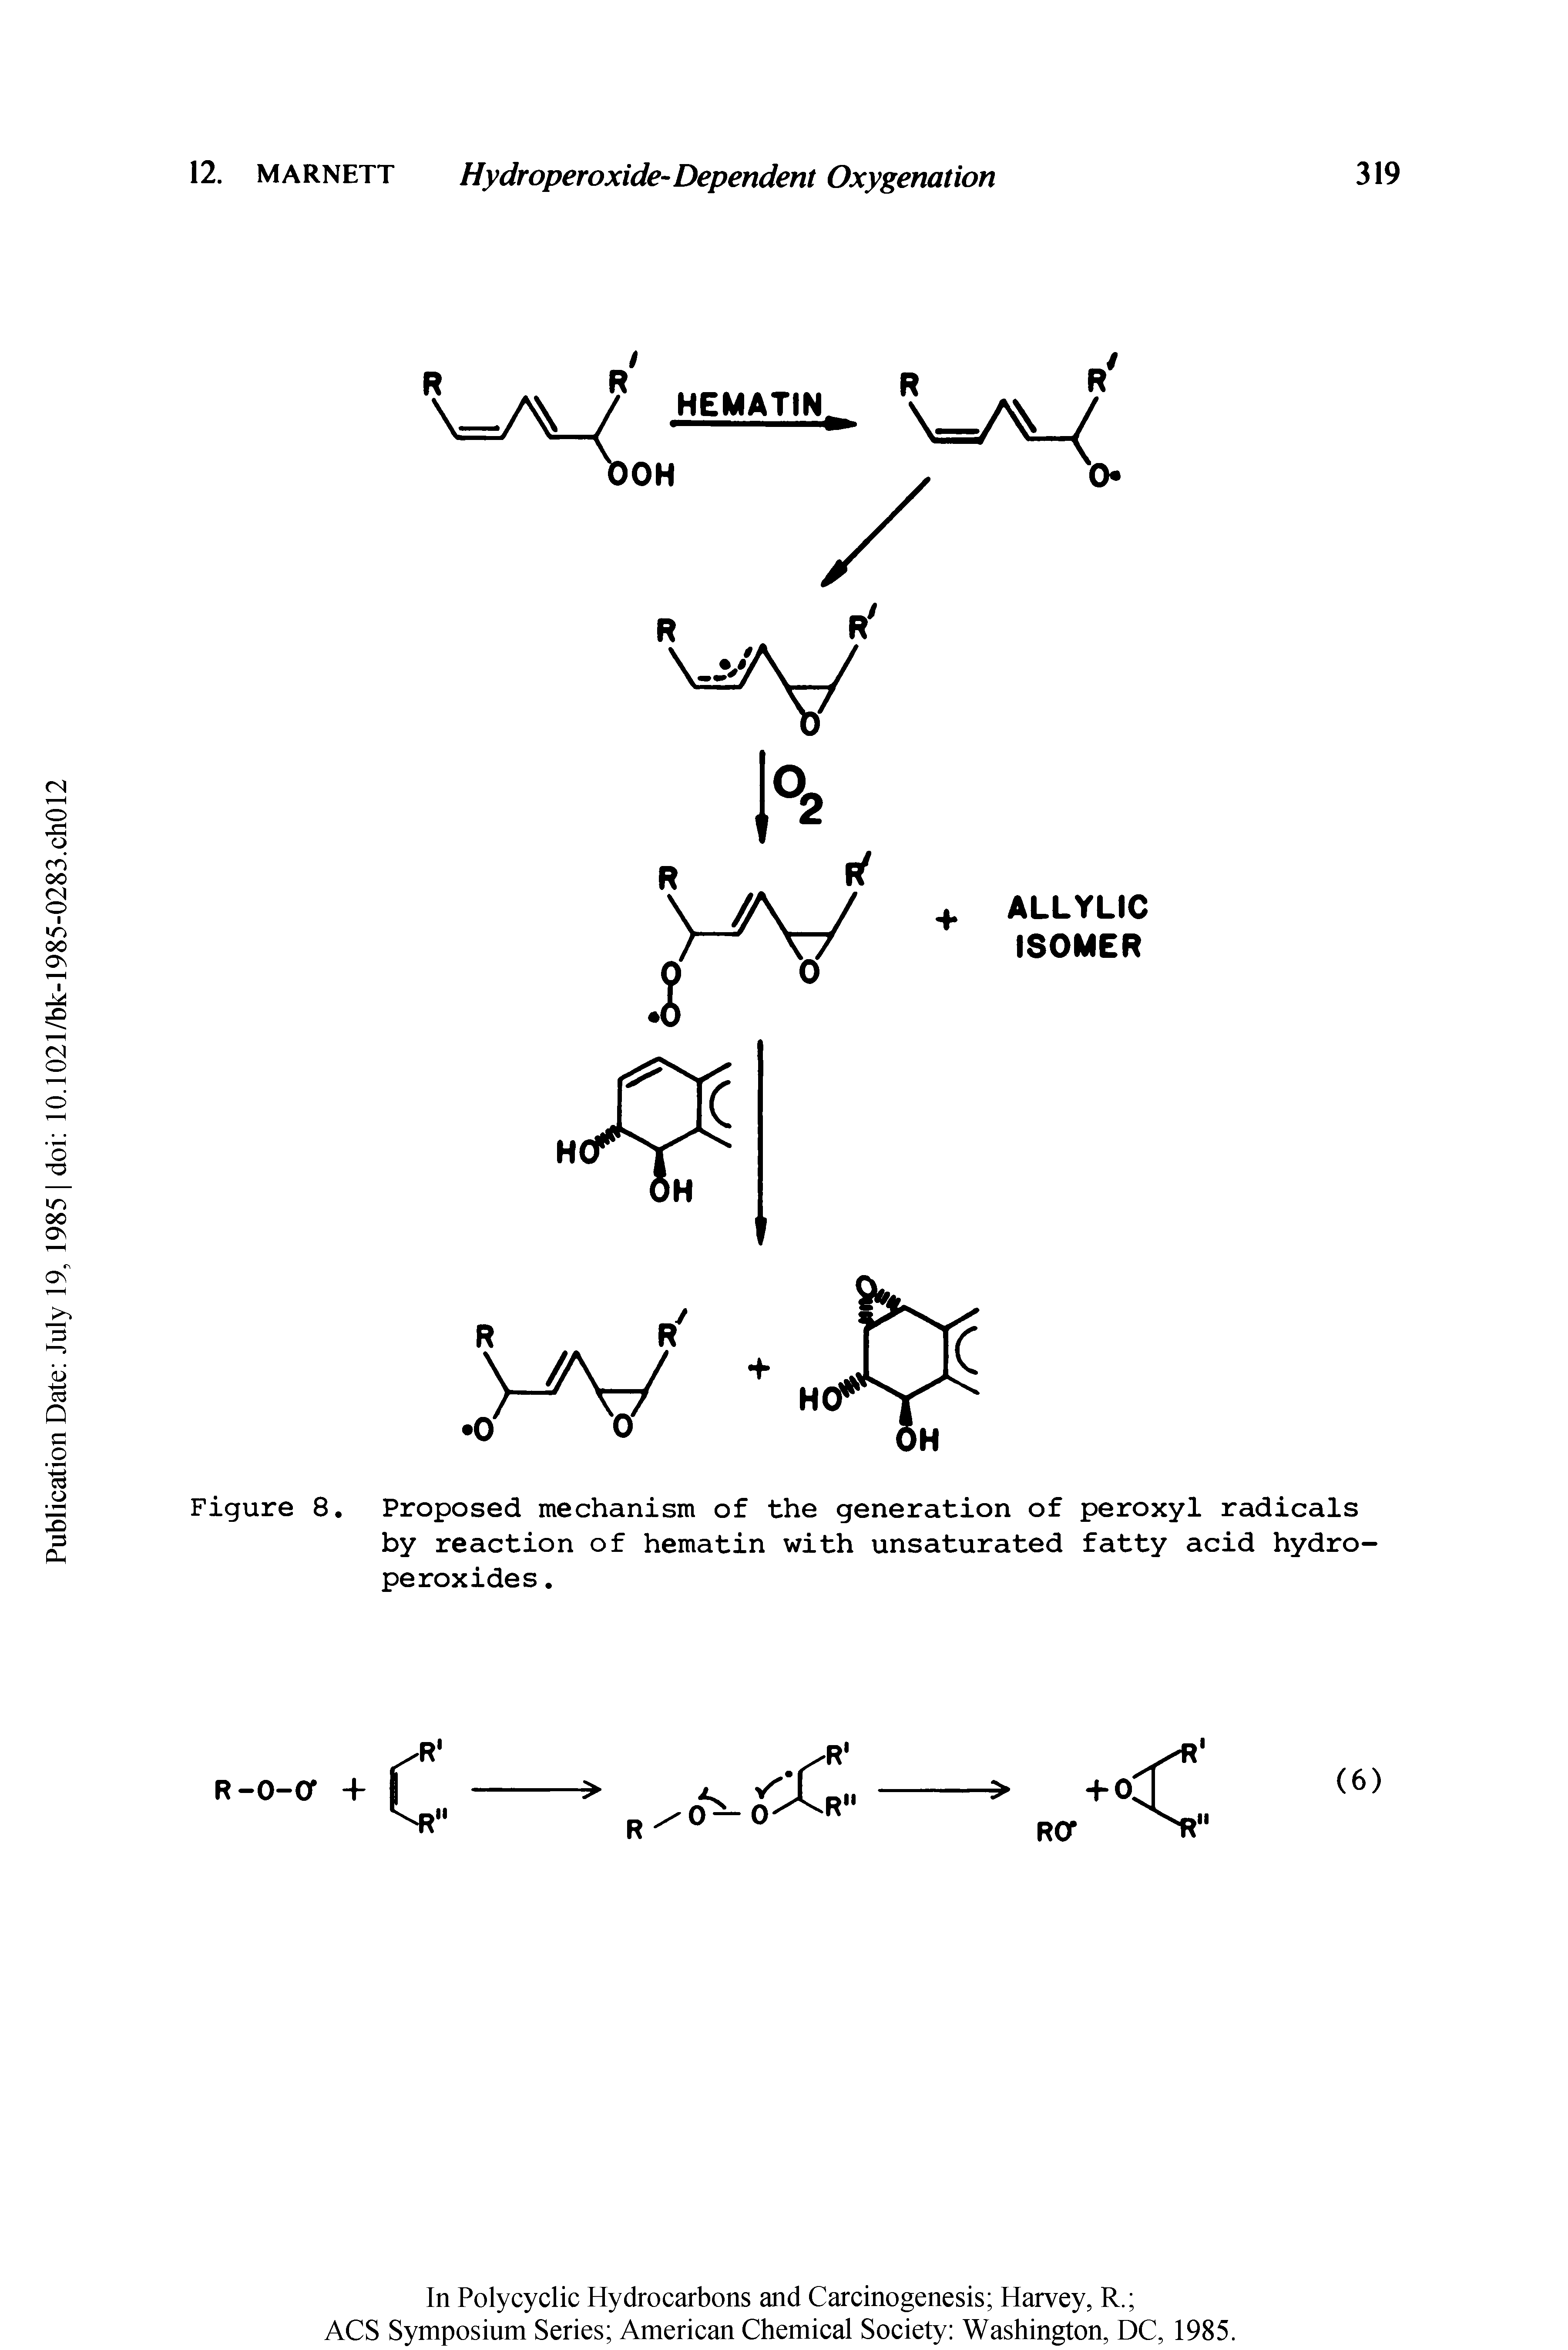 Figure 8. Proposed mechanism of the generation of peroxyl radicals by reaction of hematin with unsaturated fatty acid hydroperoxides. ...